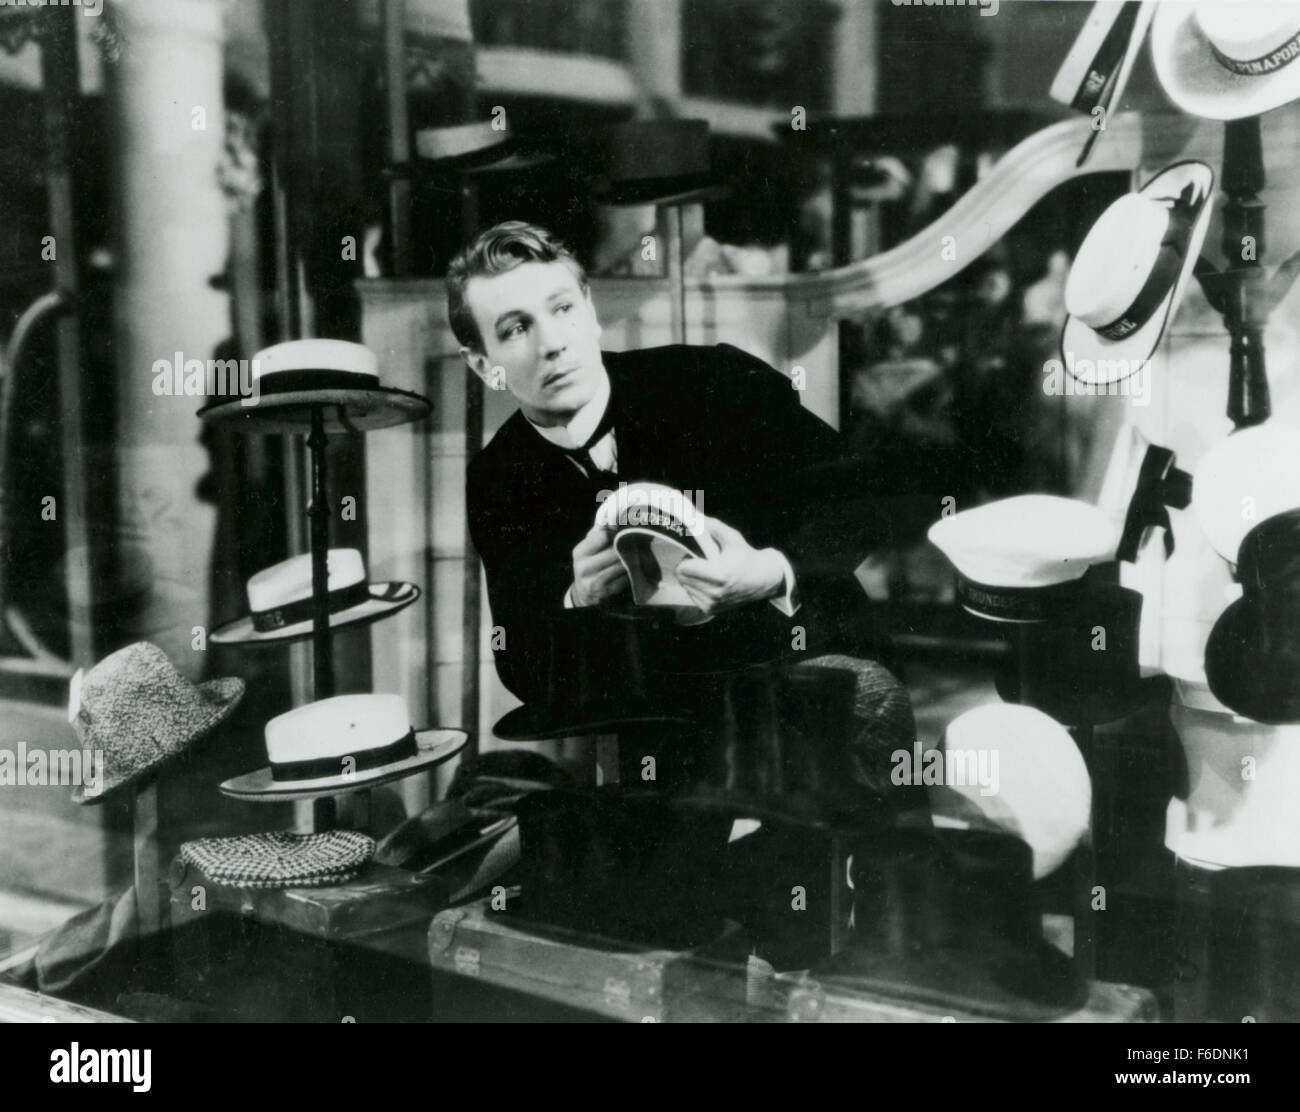 RELEASE DATE: May 24, 1942. MOVIE TITLE: Kipps. STUDIO: Twentieth Century-Fox Productions. PLOT: . PICTURED: MICHAEL REDGRAVE as Kipss. Stock Photo